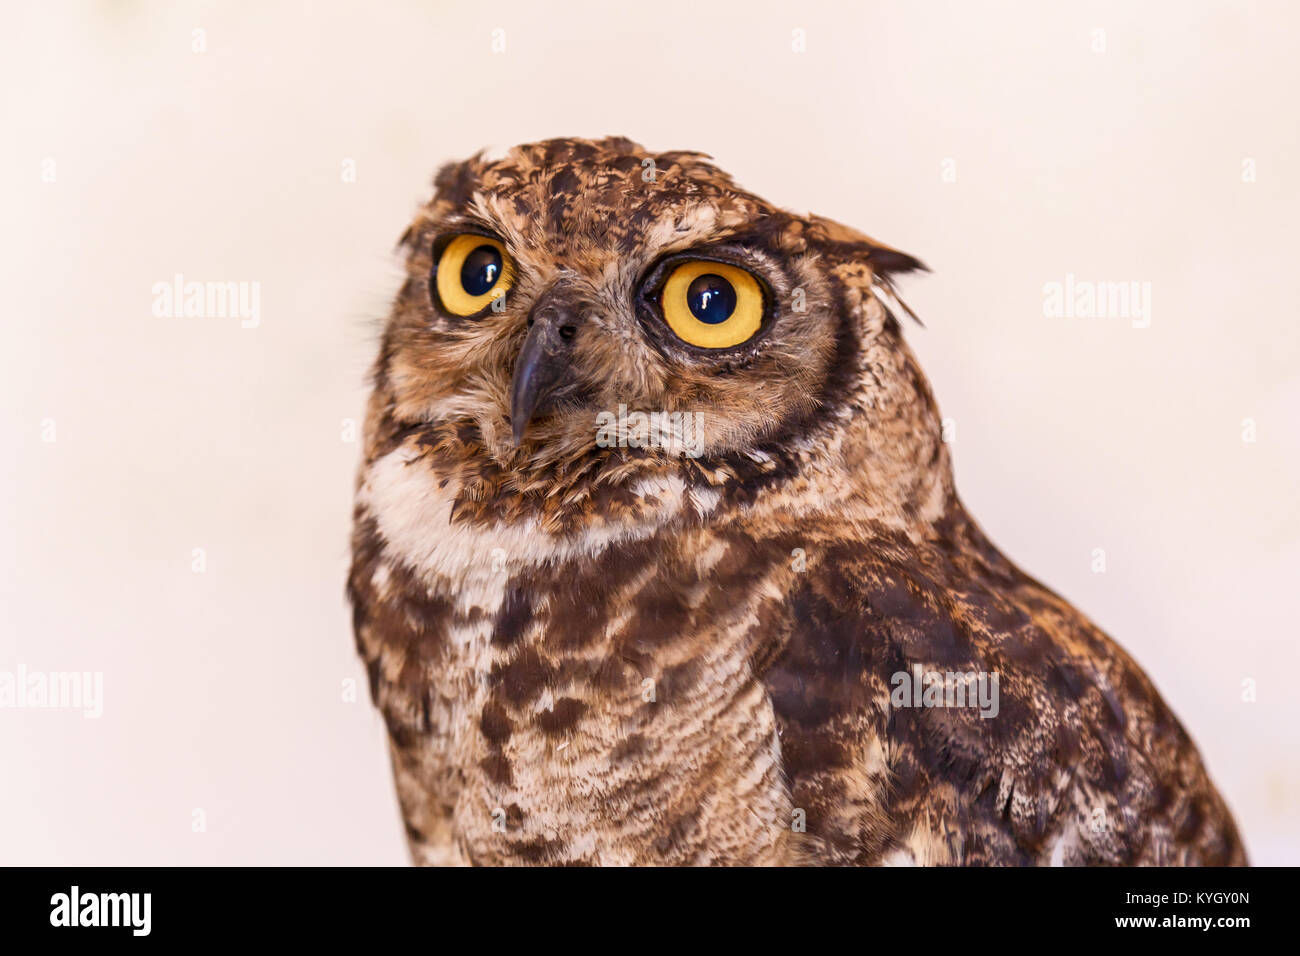 Owl in the white background. Stock Photo